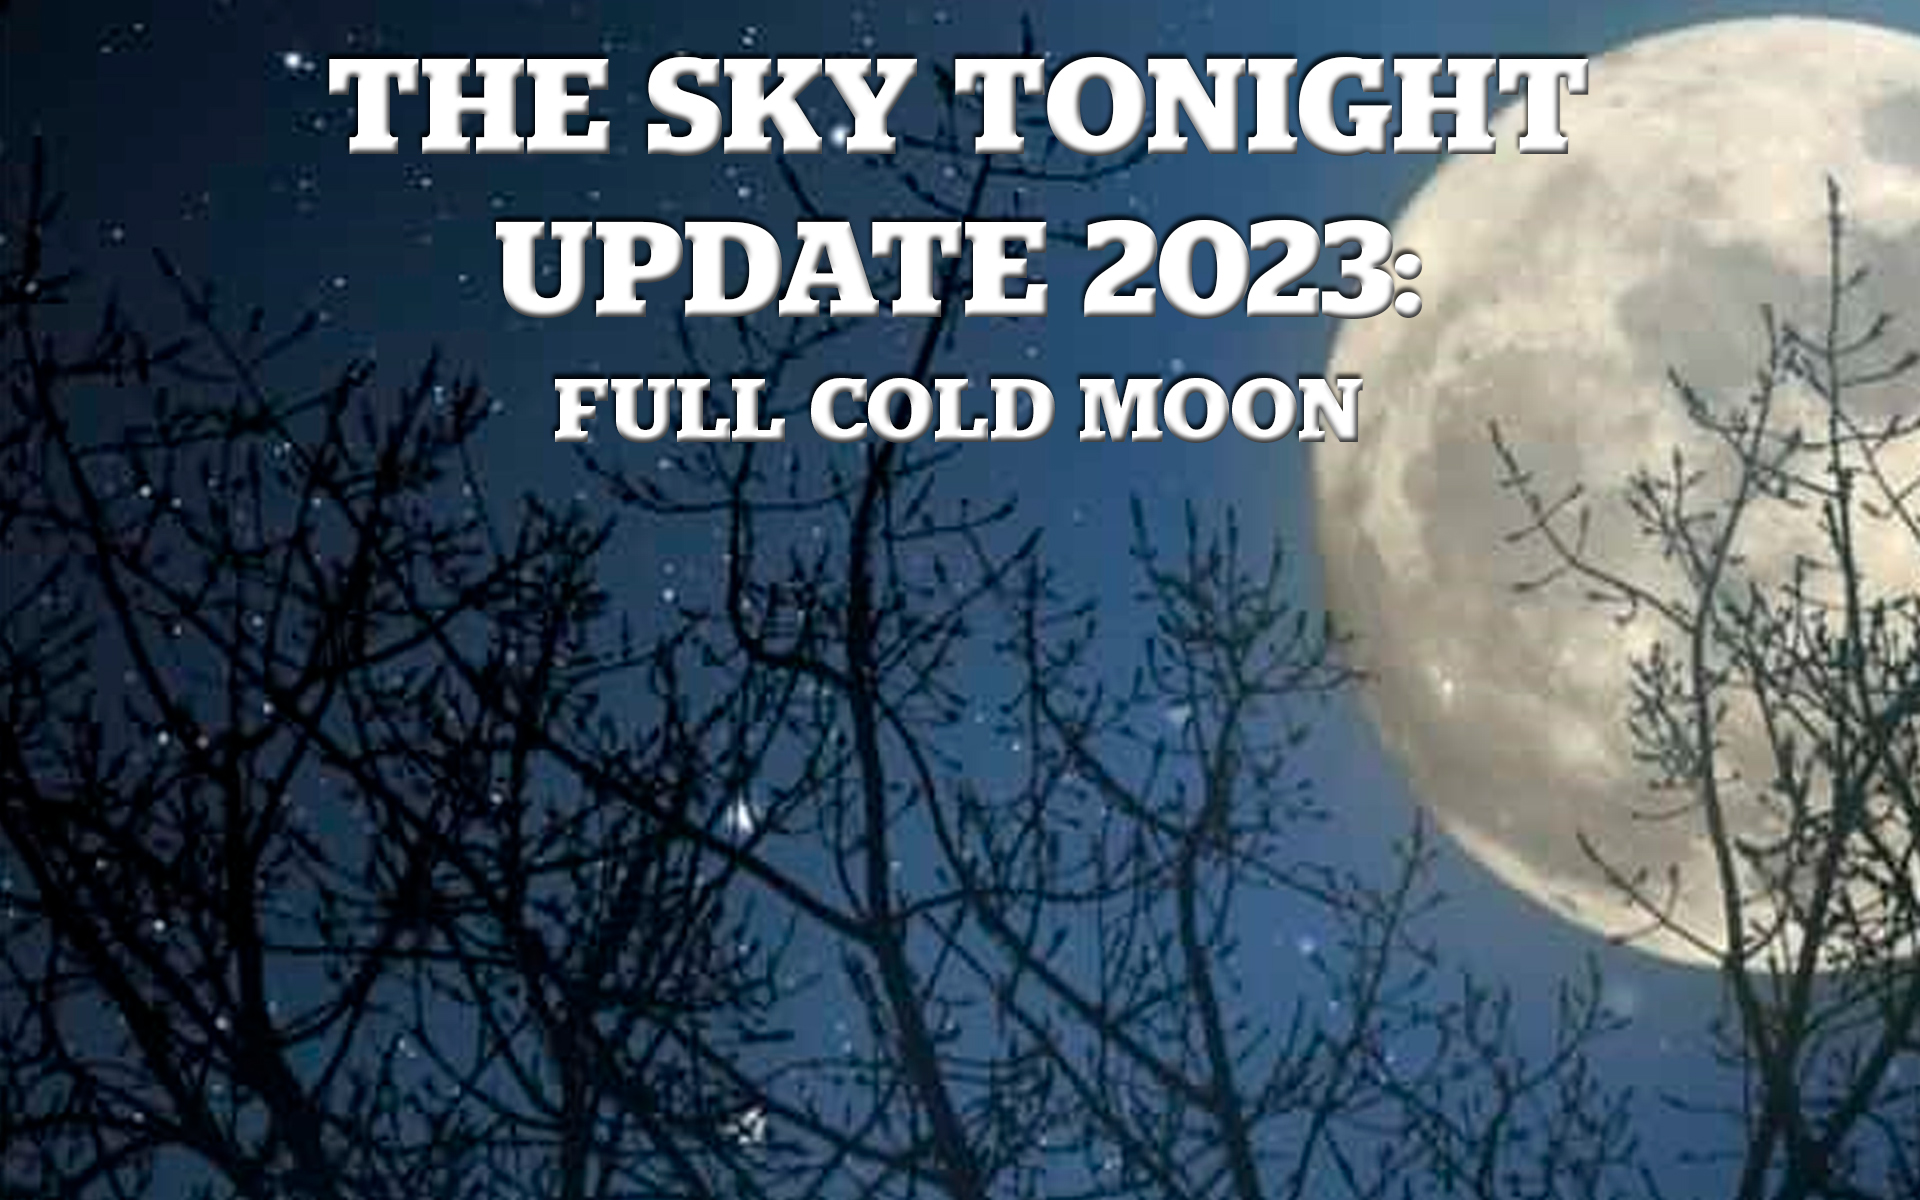 The Sky Tonight Update: Full Cold Moon